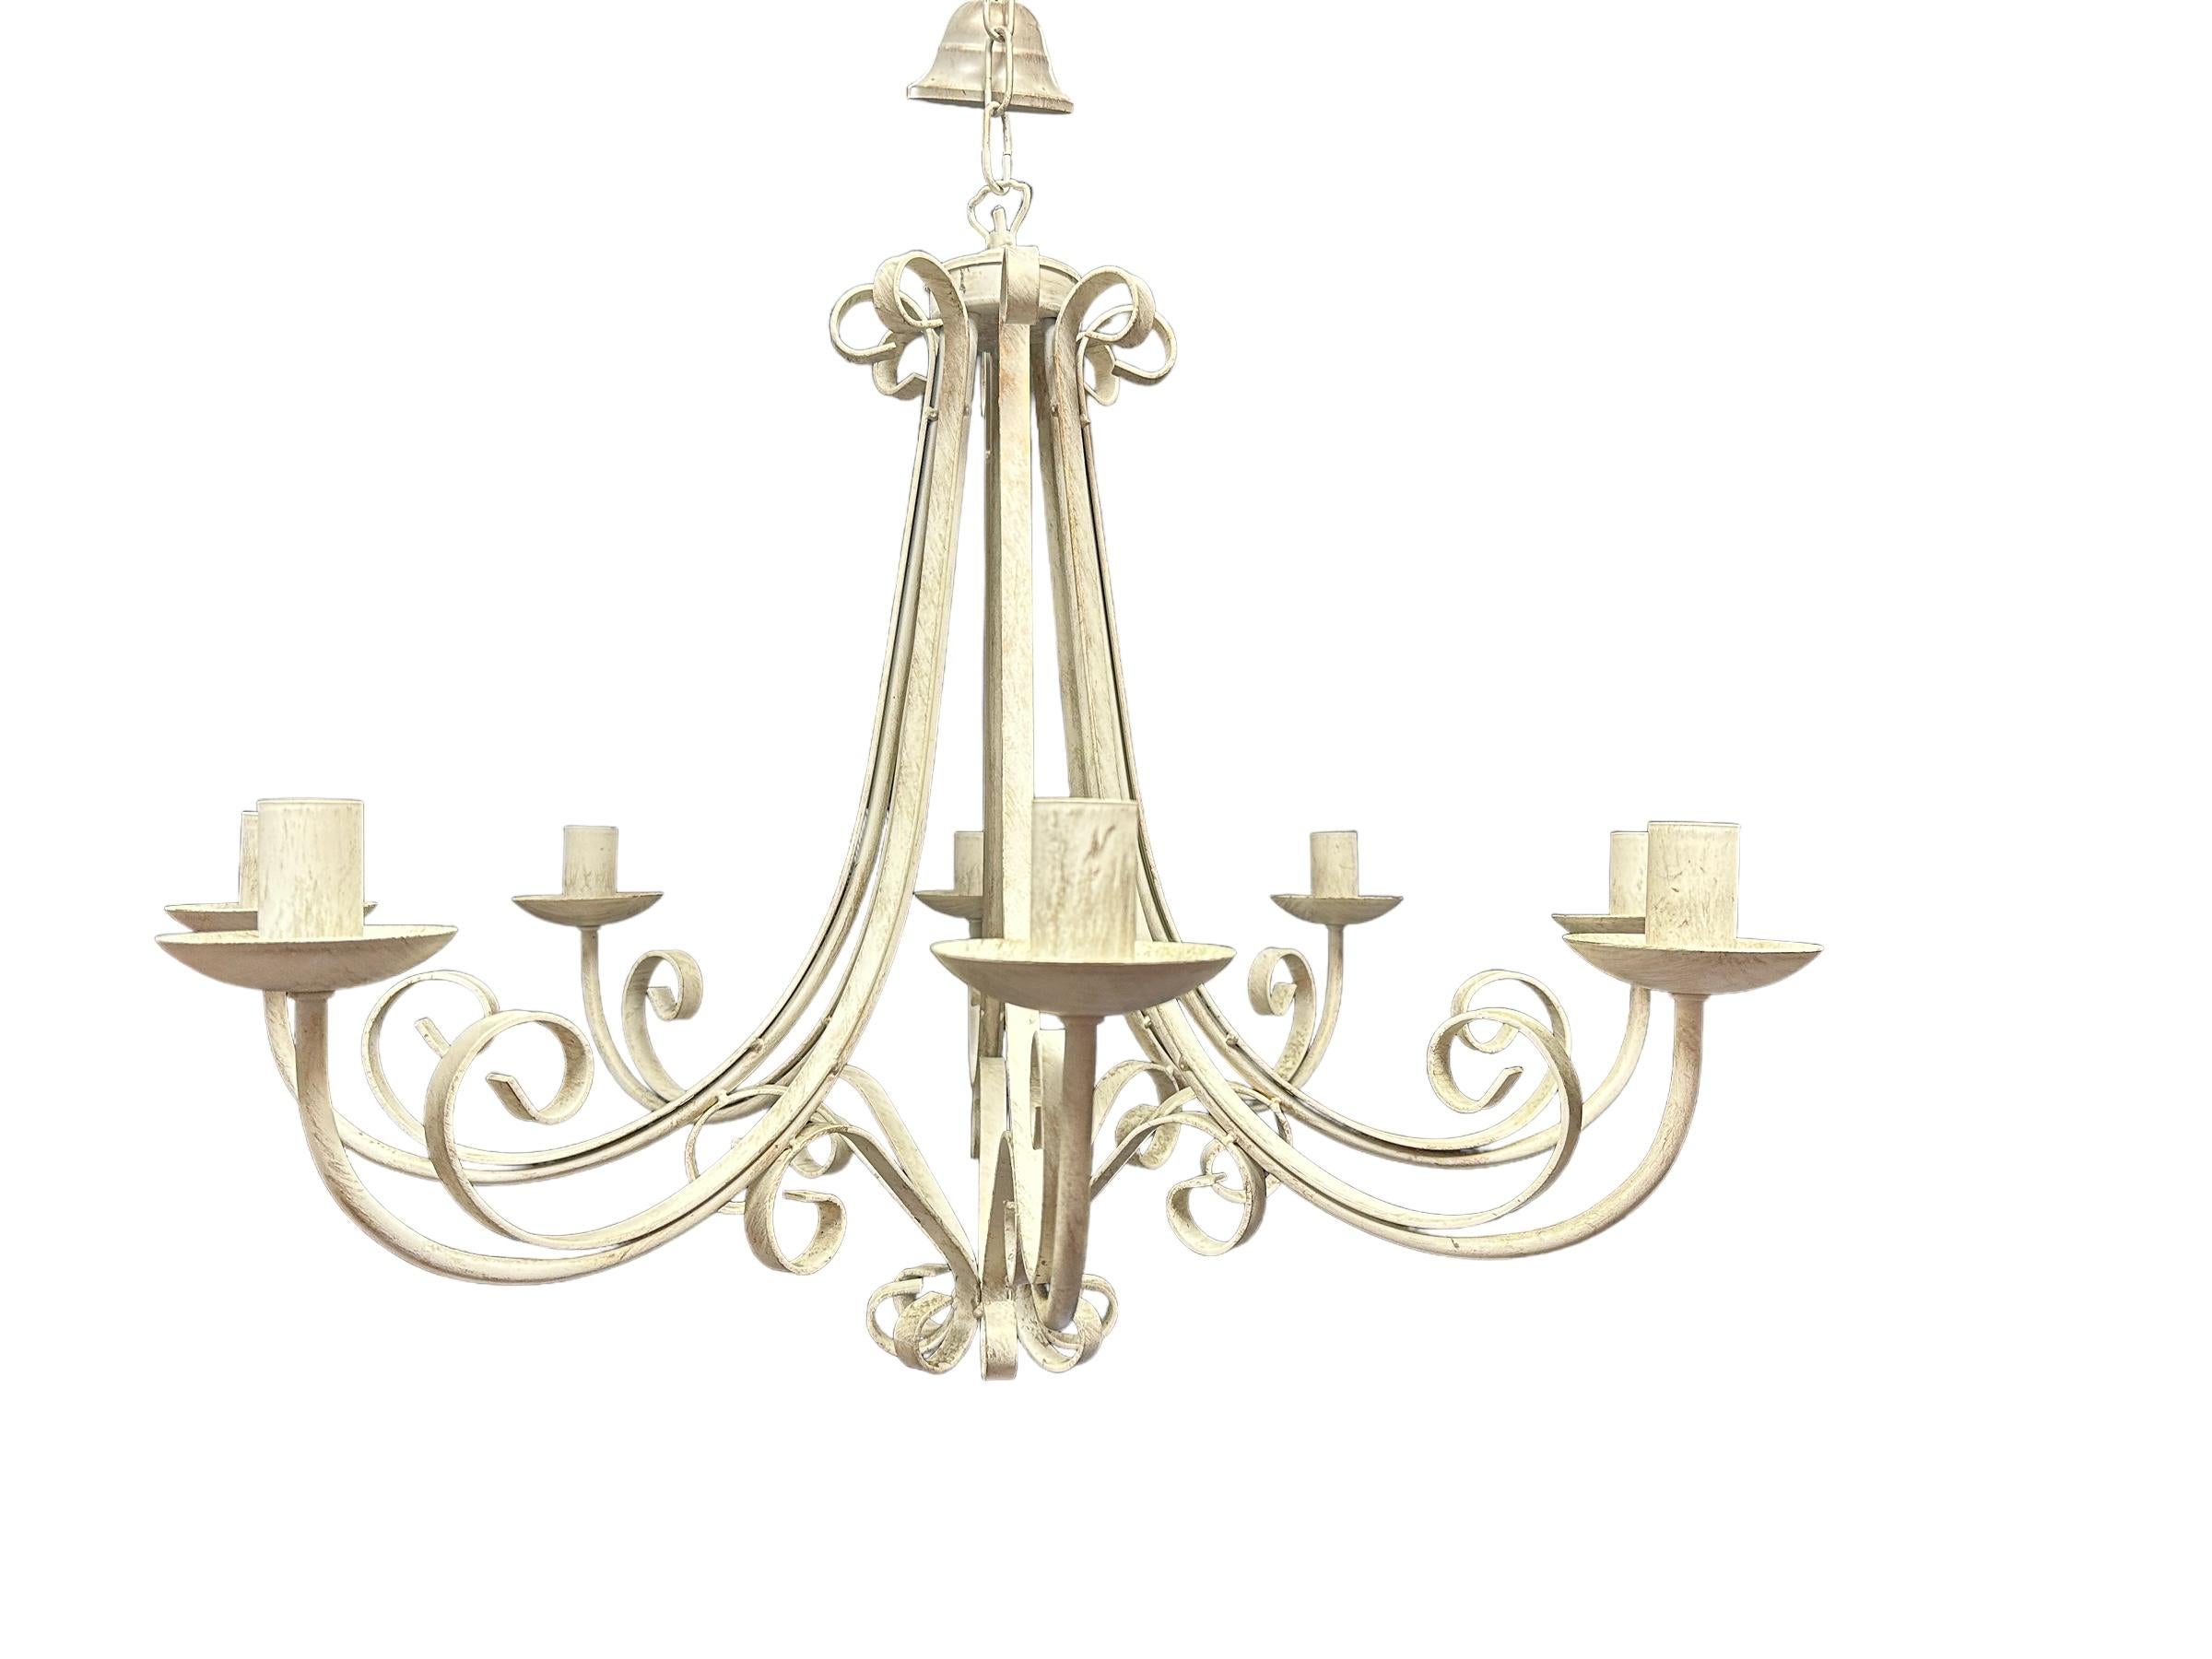 A beautiful shabby white iron chandelier by the prestigious Honsel Leuchten Manufactory in Germany.
Measurement:  31